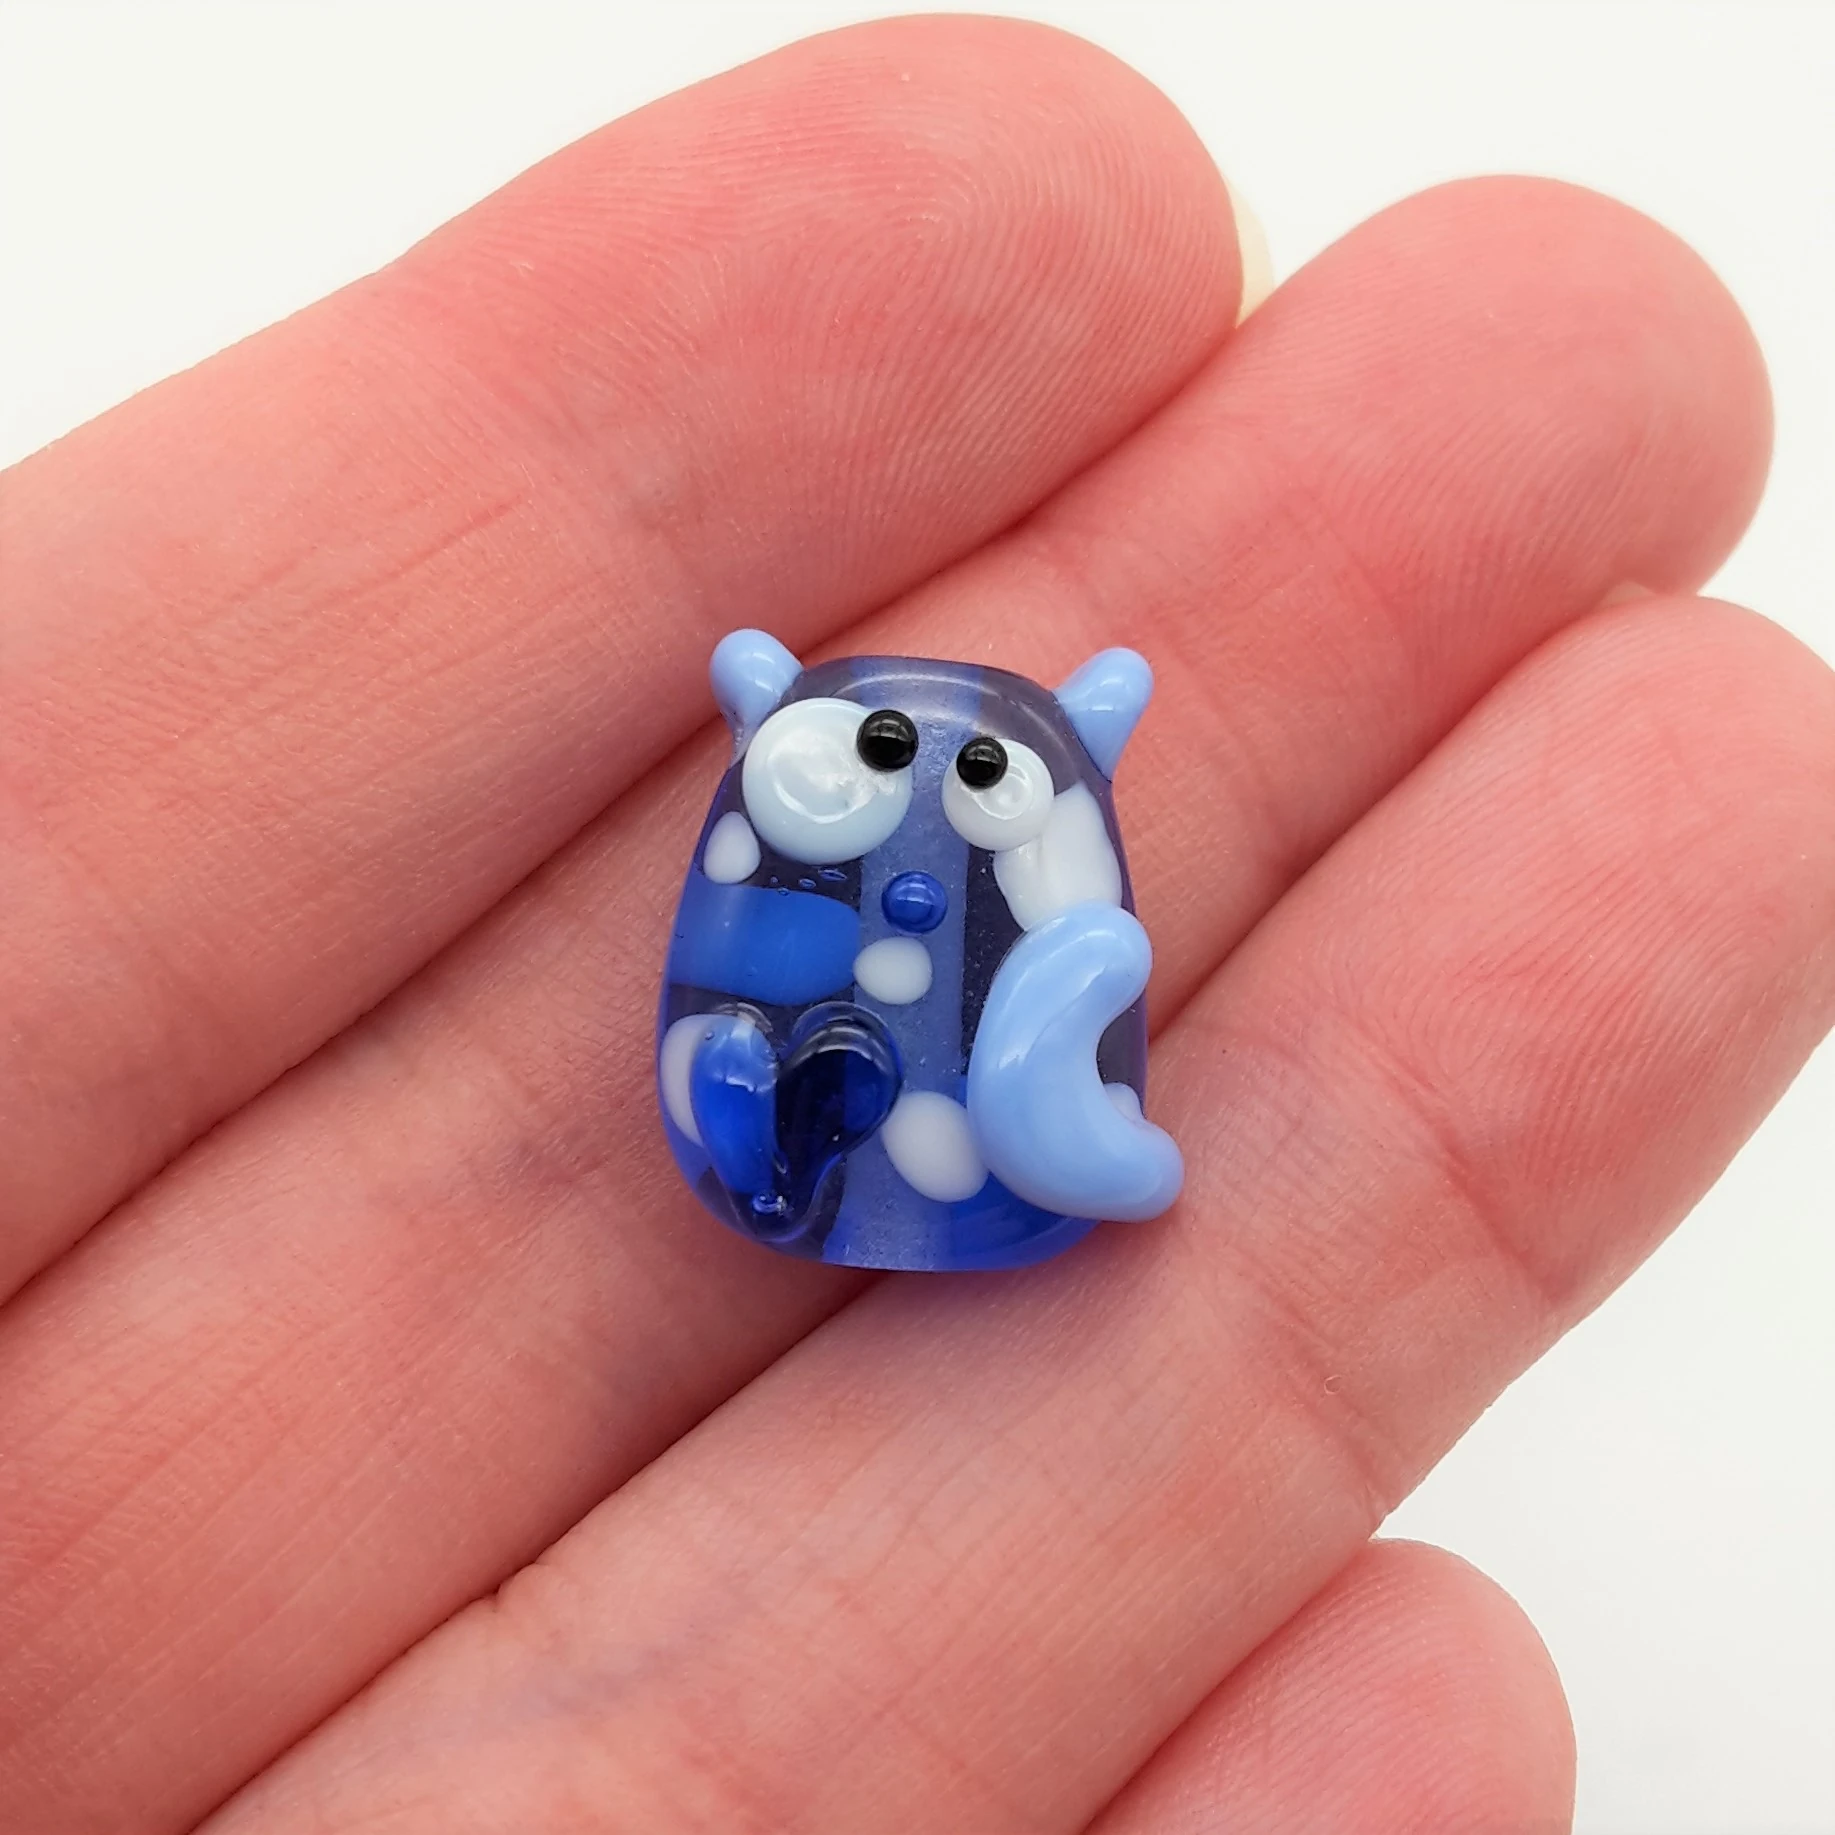 Lampwork glass bead in blues and whites.